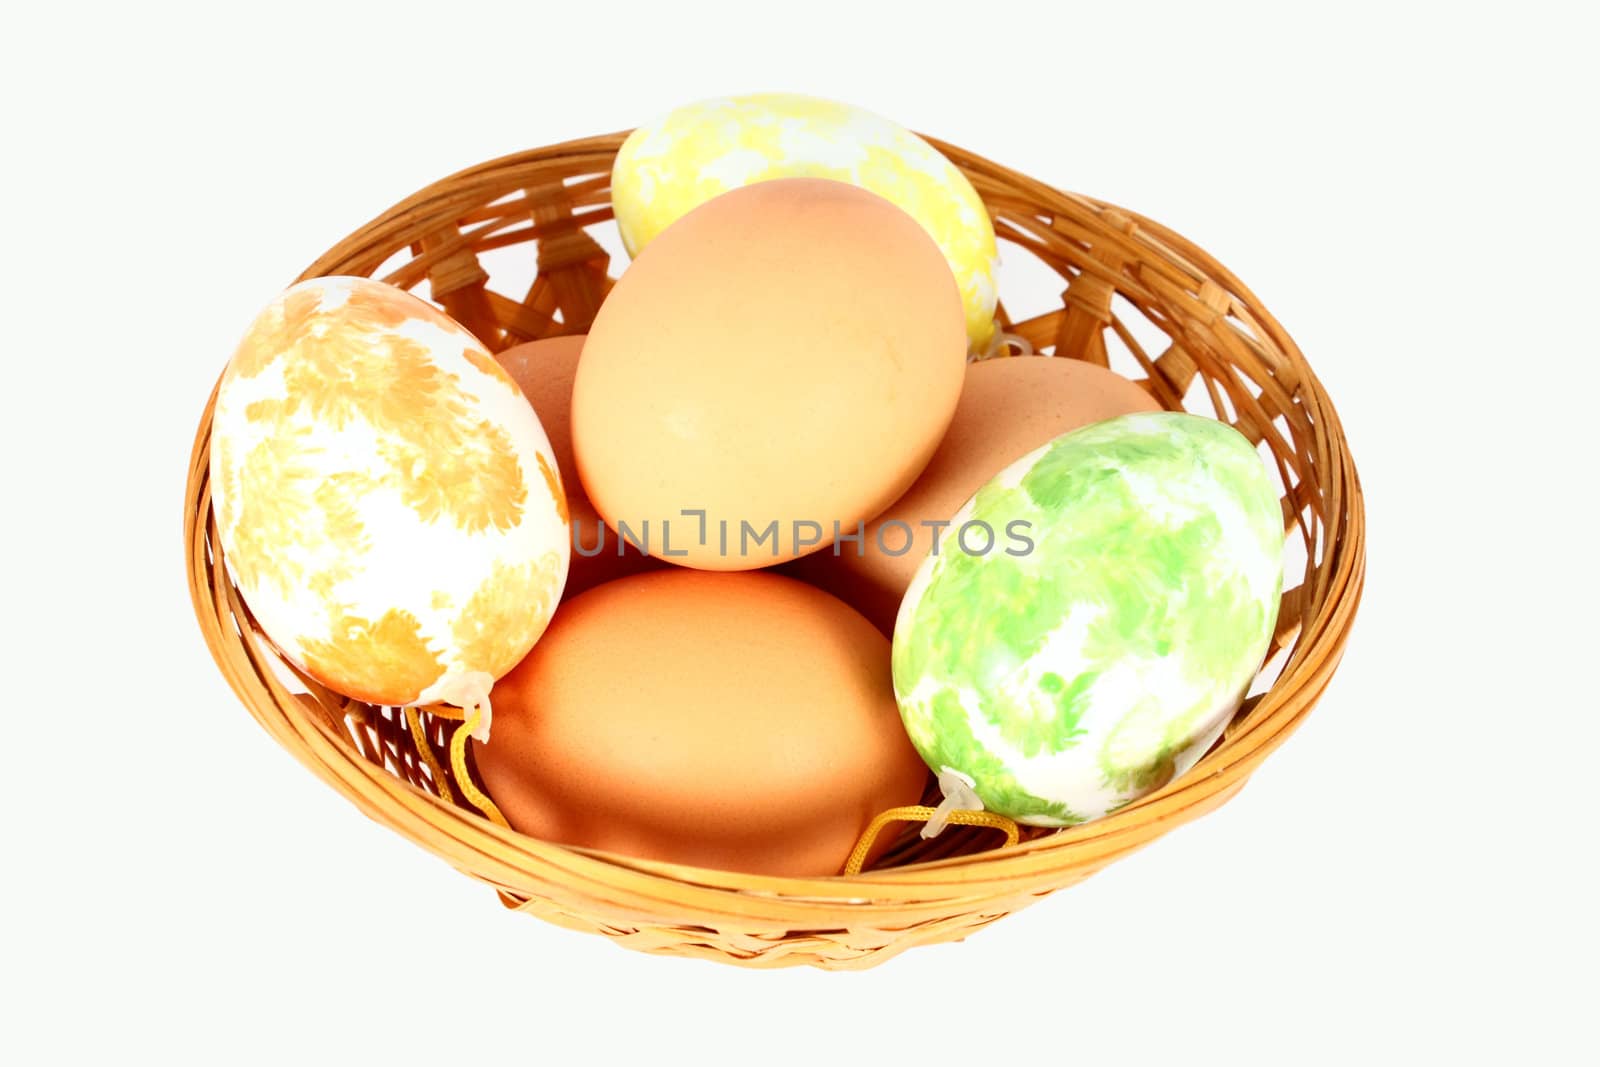 Basket containing easter eggs by Boris15